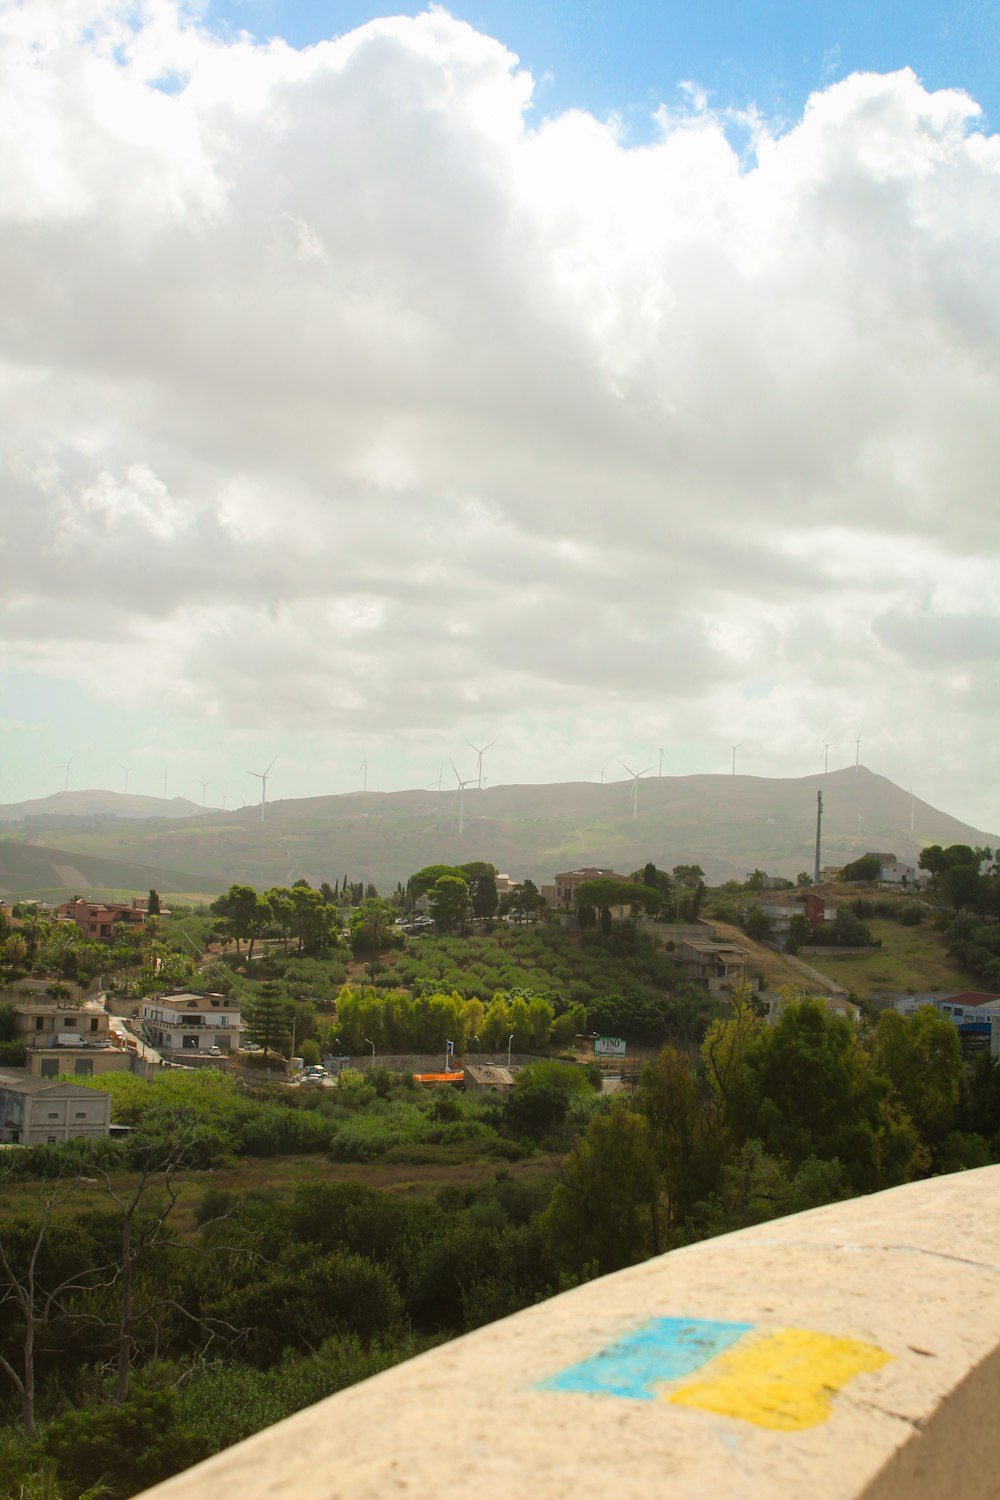 a view of a city with hills in the background